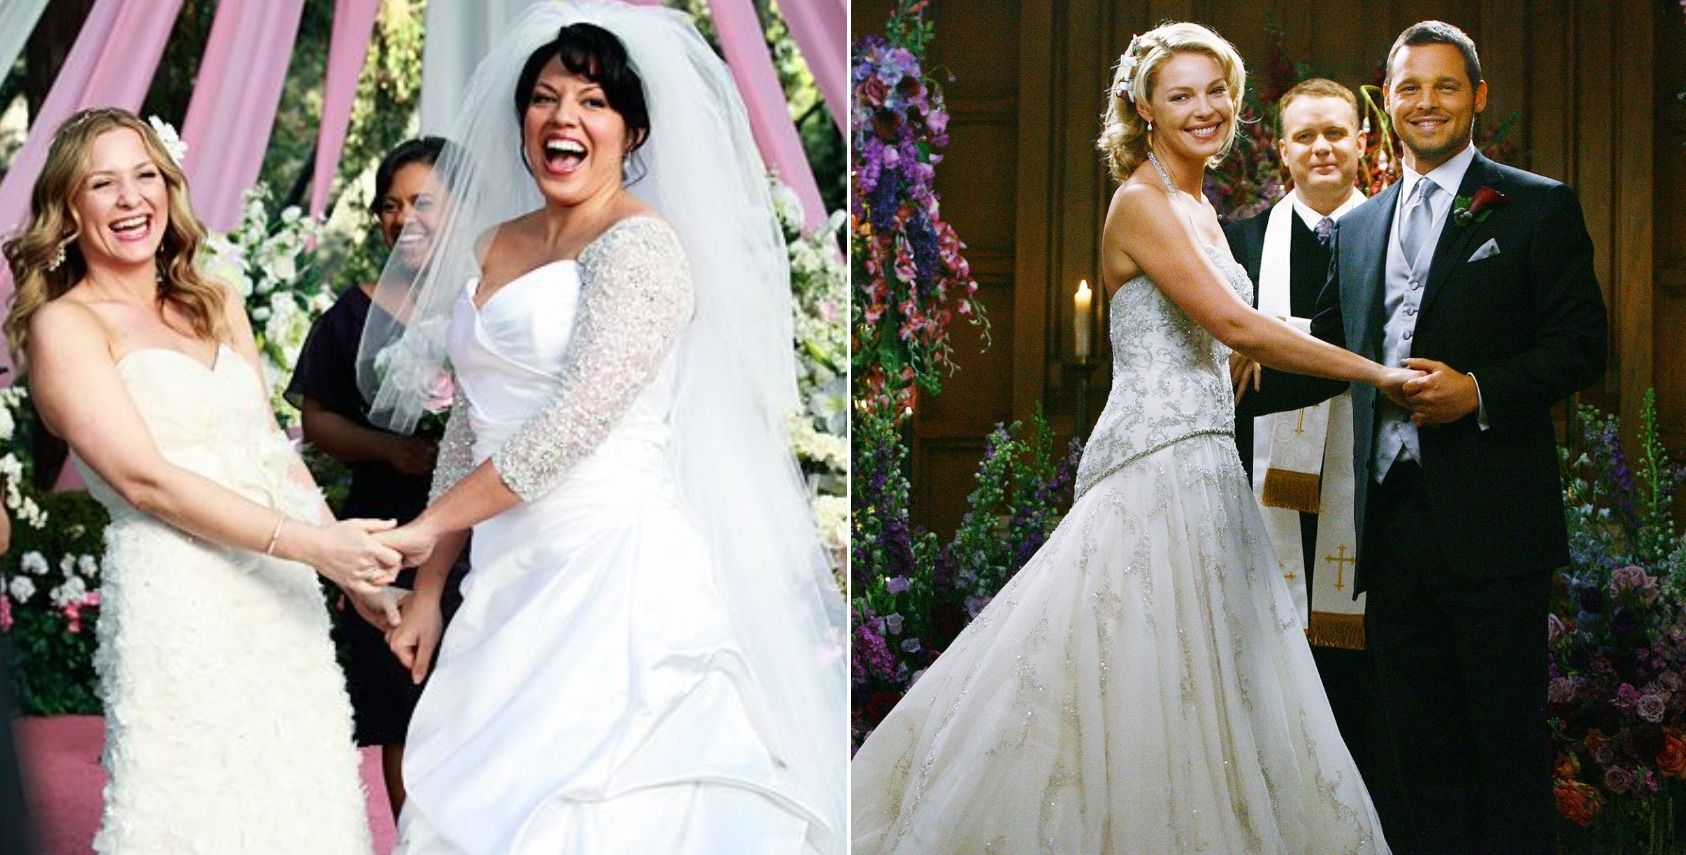 The weddings between Callie and Arizona, and Izzie and Alex in 